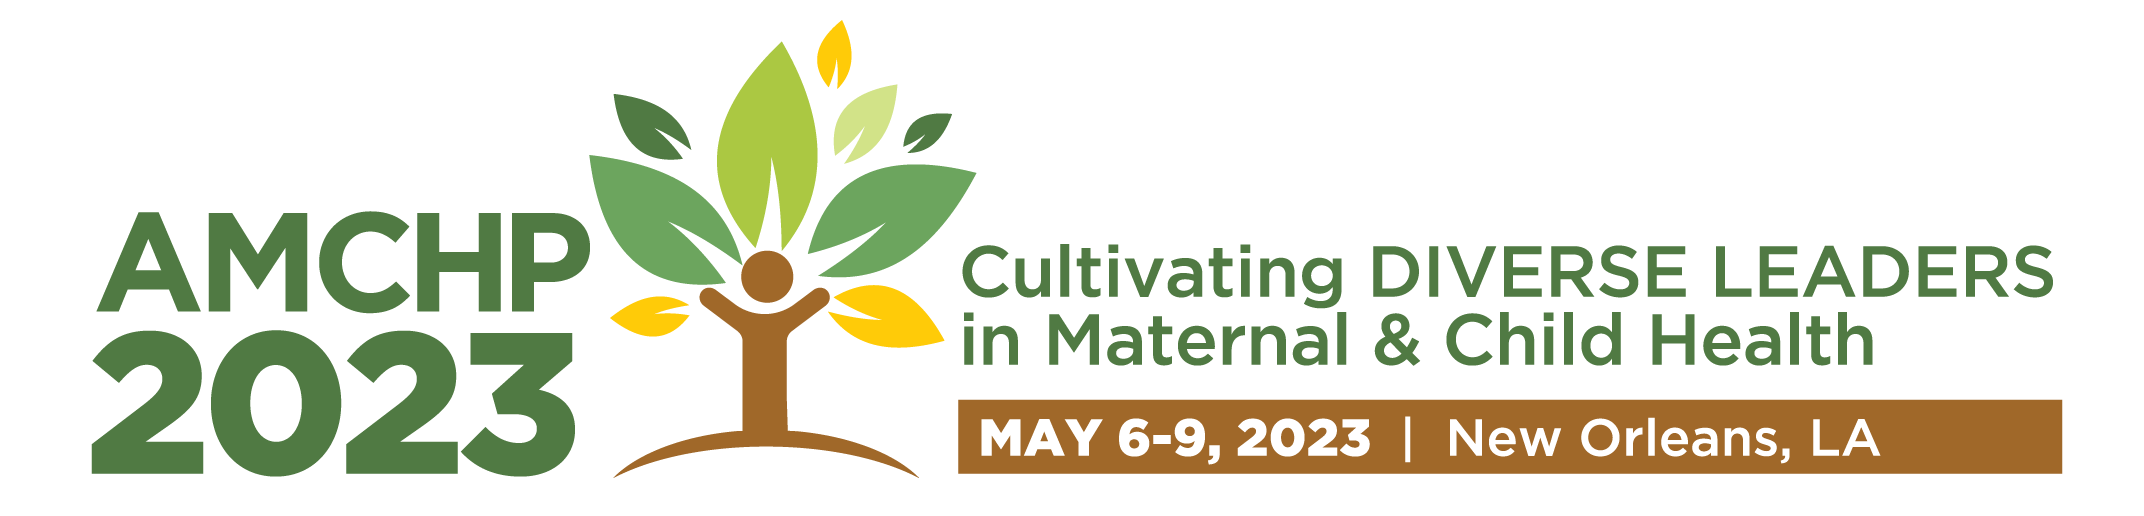 AMCHP 2023 Annual Conference Banner includes an icon of a human holding their hands up with different shades of green leaves above it so it looks like it's growing. Next to it is the theme displayed in green, "Cultivating Diverse Leaders in Maternal & Child Health", and the date/location of the conference in white on a brown rectangle background, "May 6-9, 2023 | New Orleans, LA"